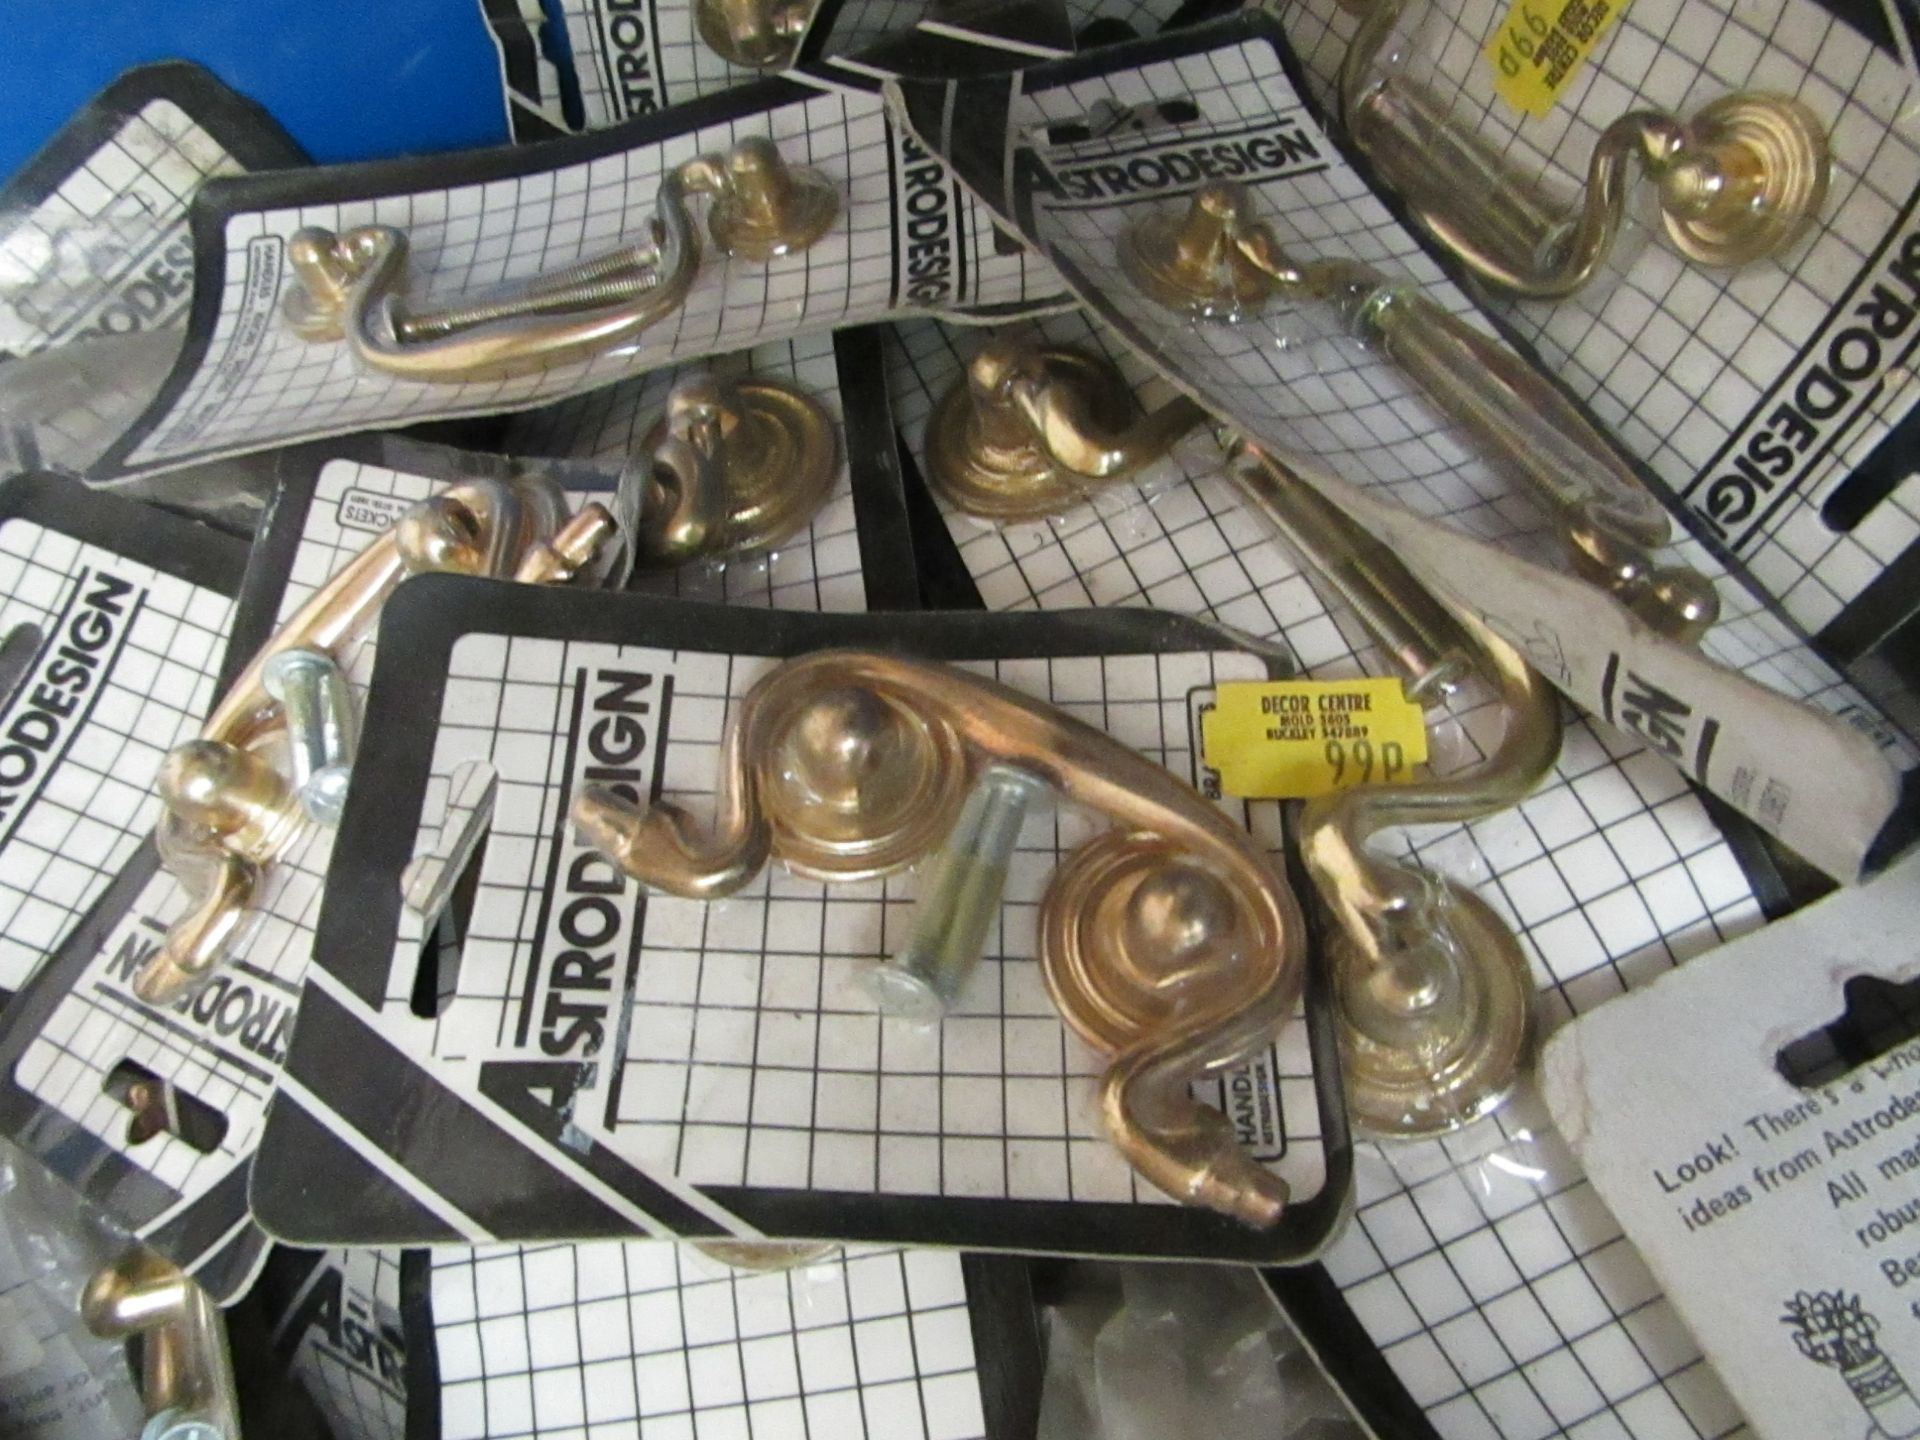 20 x Brass handles. Still in Packaging. See Image For Design